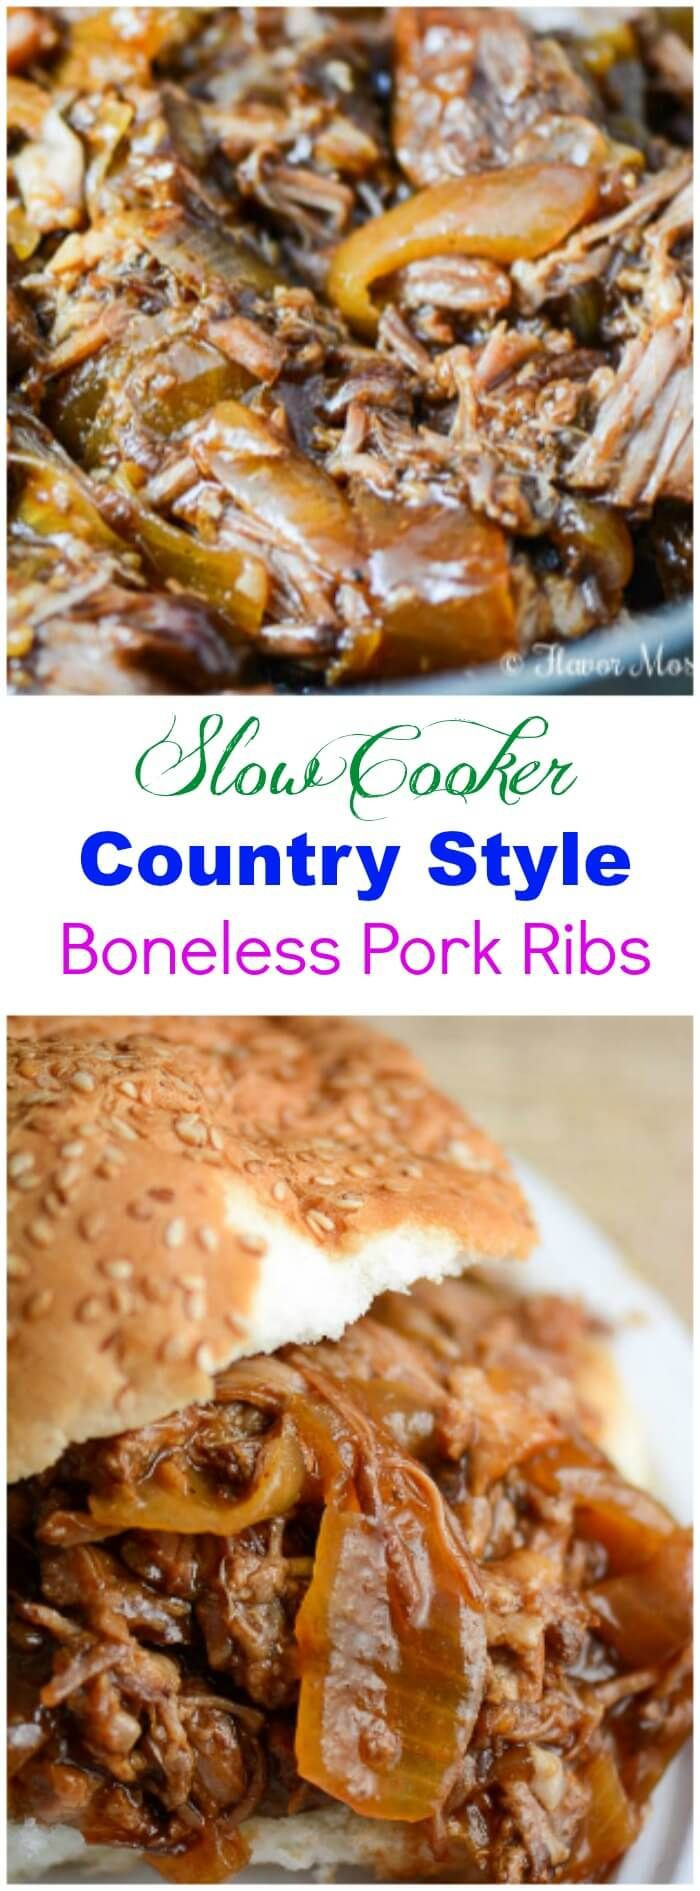 Boneless Country Style Pork Ribs Slow Cooker
 Slow Cooker Country Style Boneless Pork Ribs